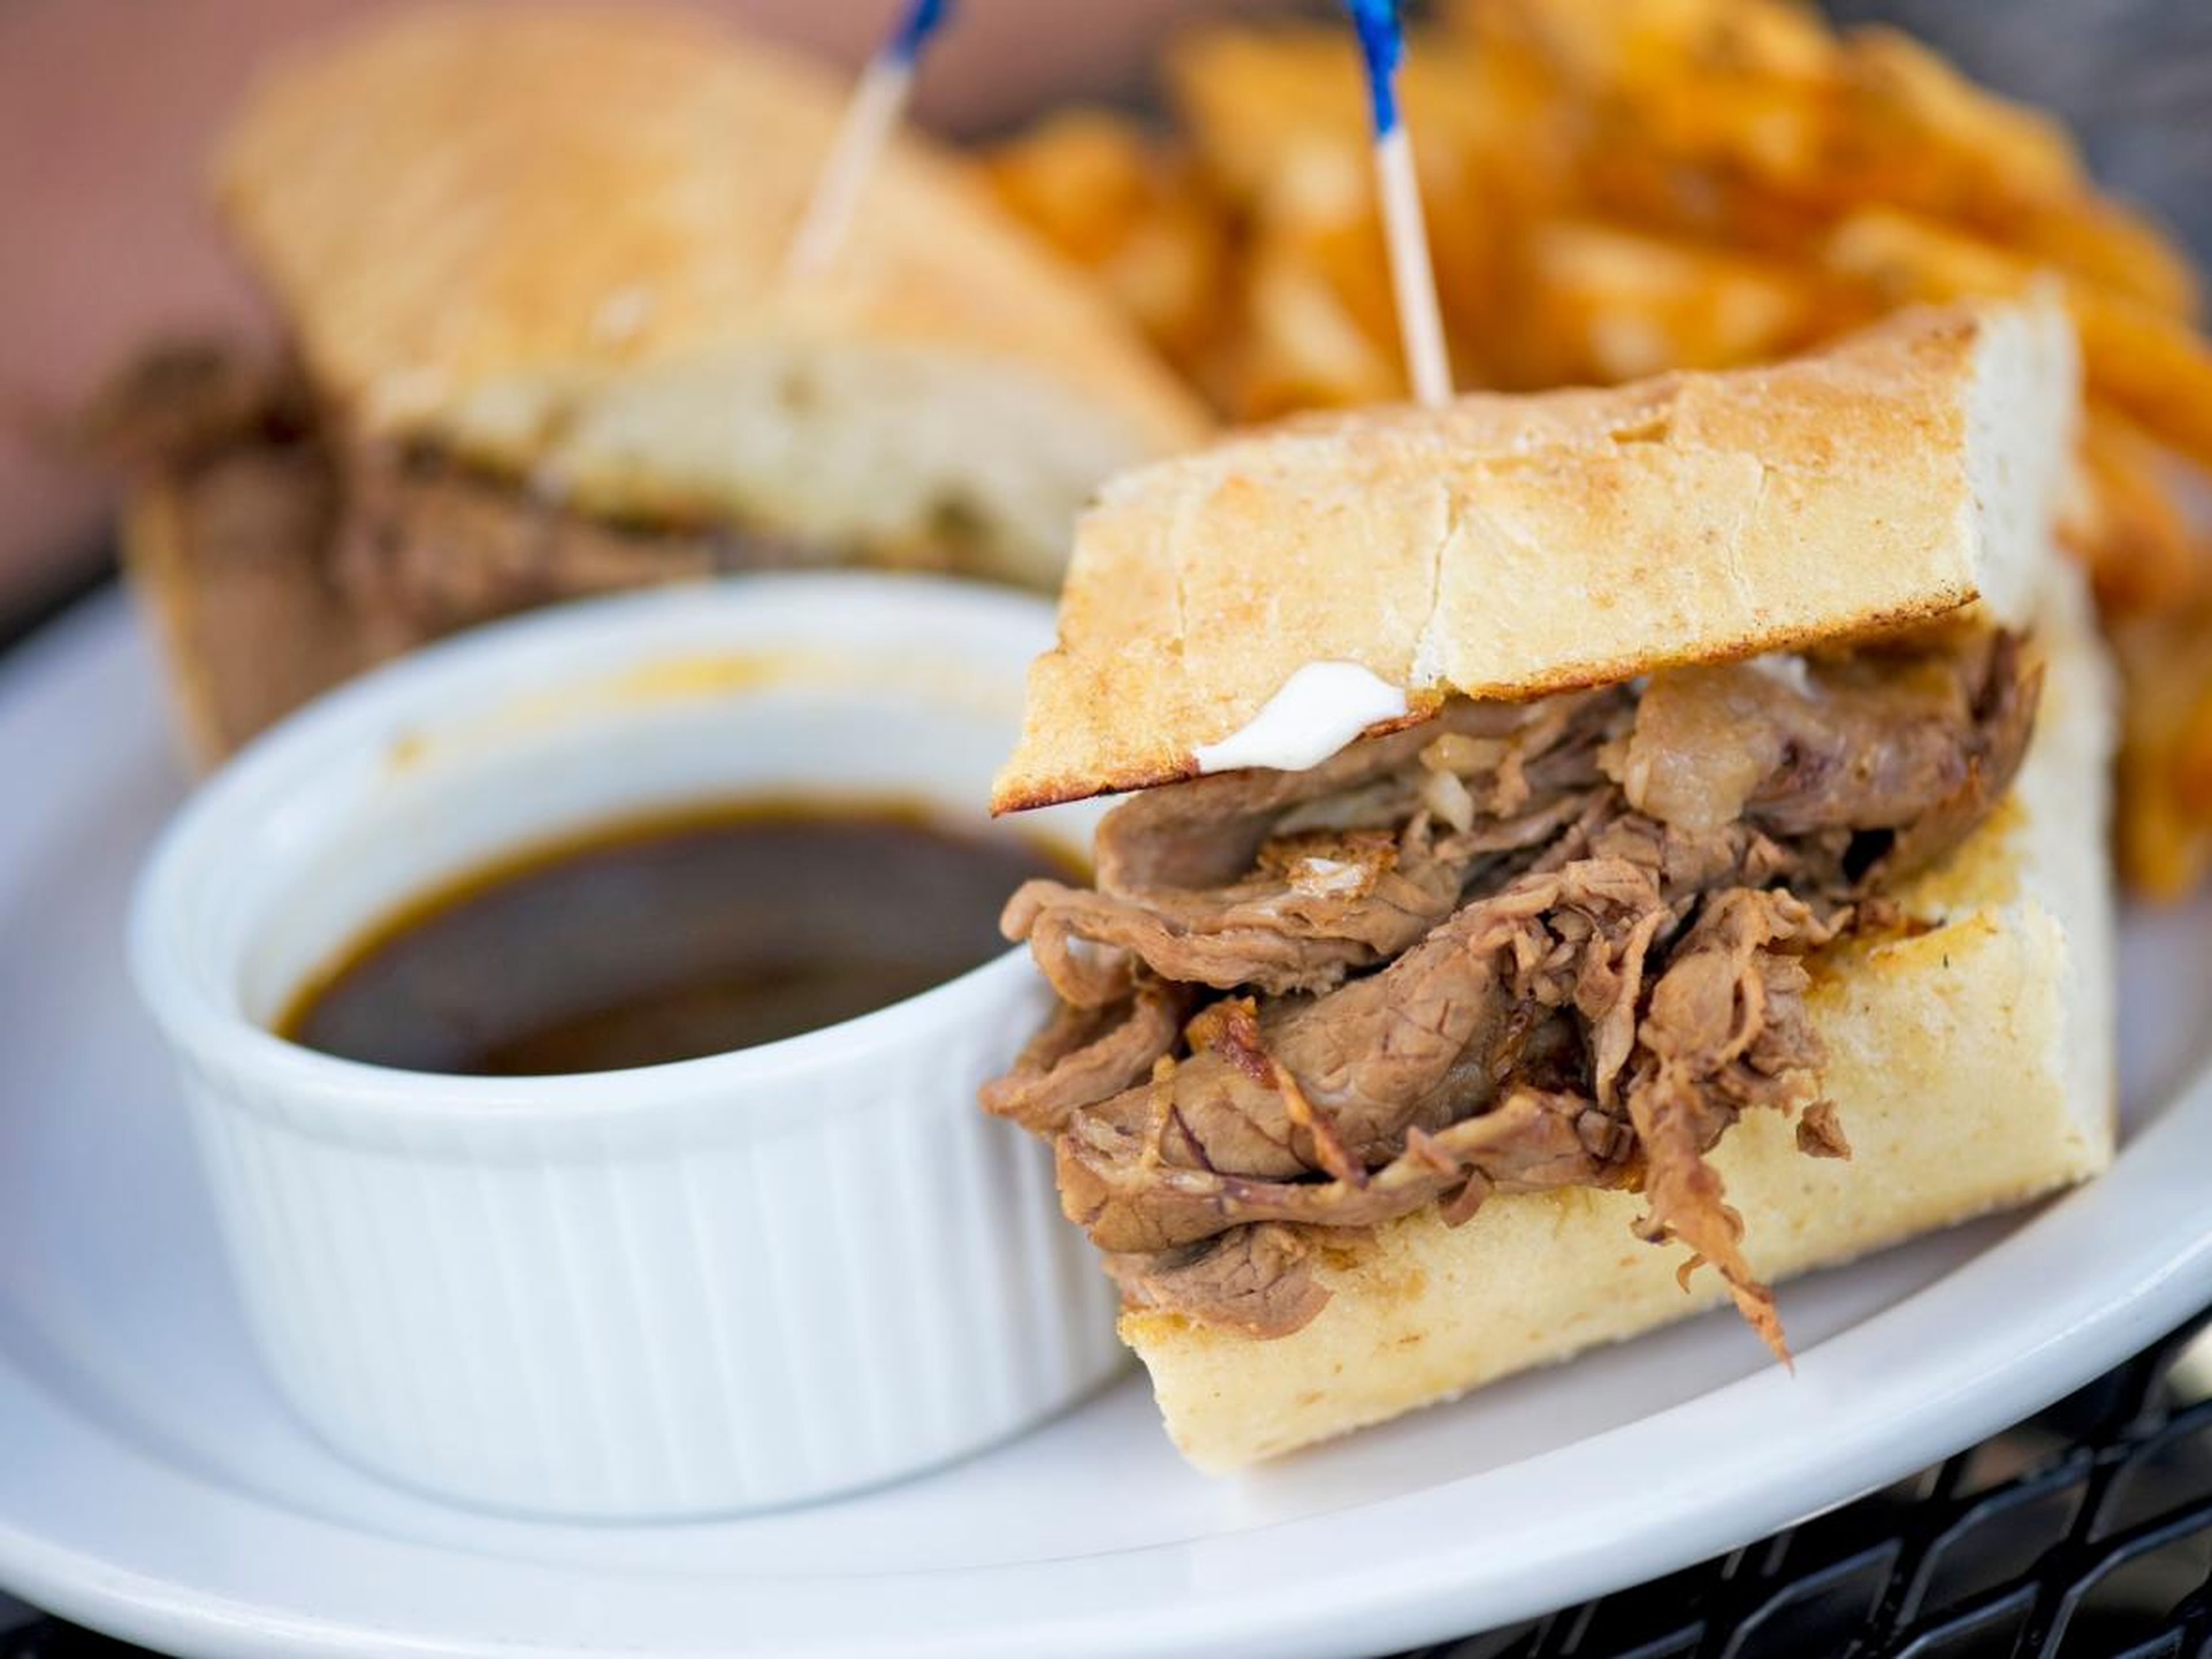 Philippe's says it's traditionally made with roast beef — and admittedly invented at the restaurant by accident. Now, you can order the sandwich with any of the following: roast beef, roast pork, leg of lamb, turkey, pastrami, or